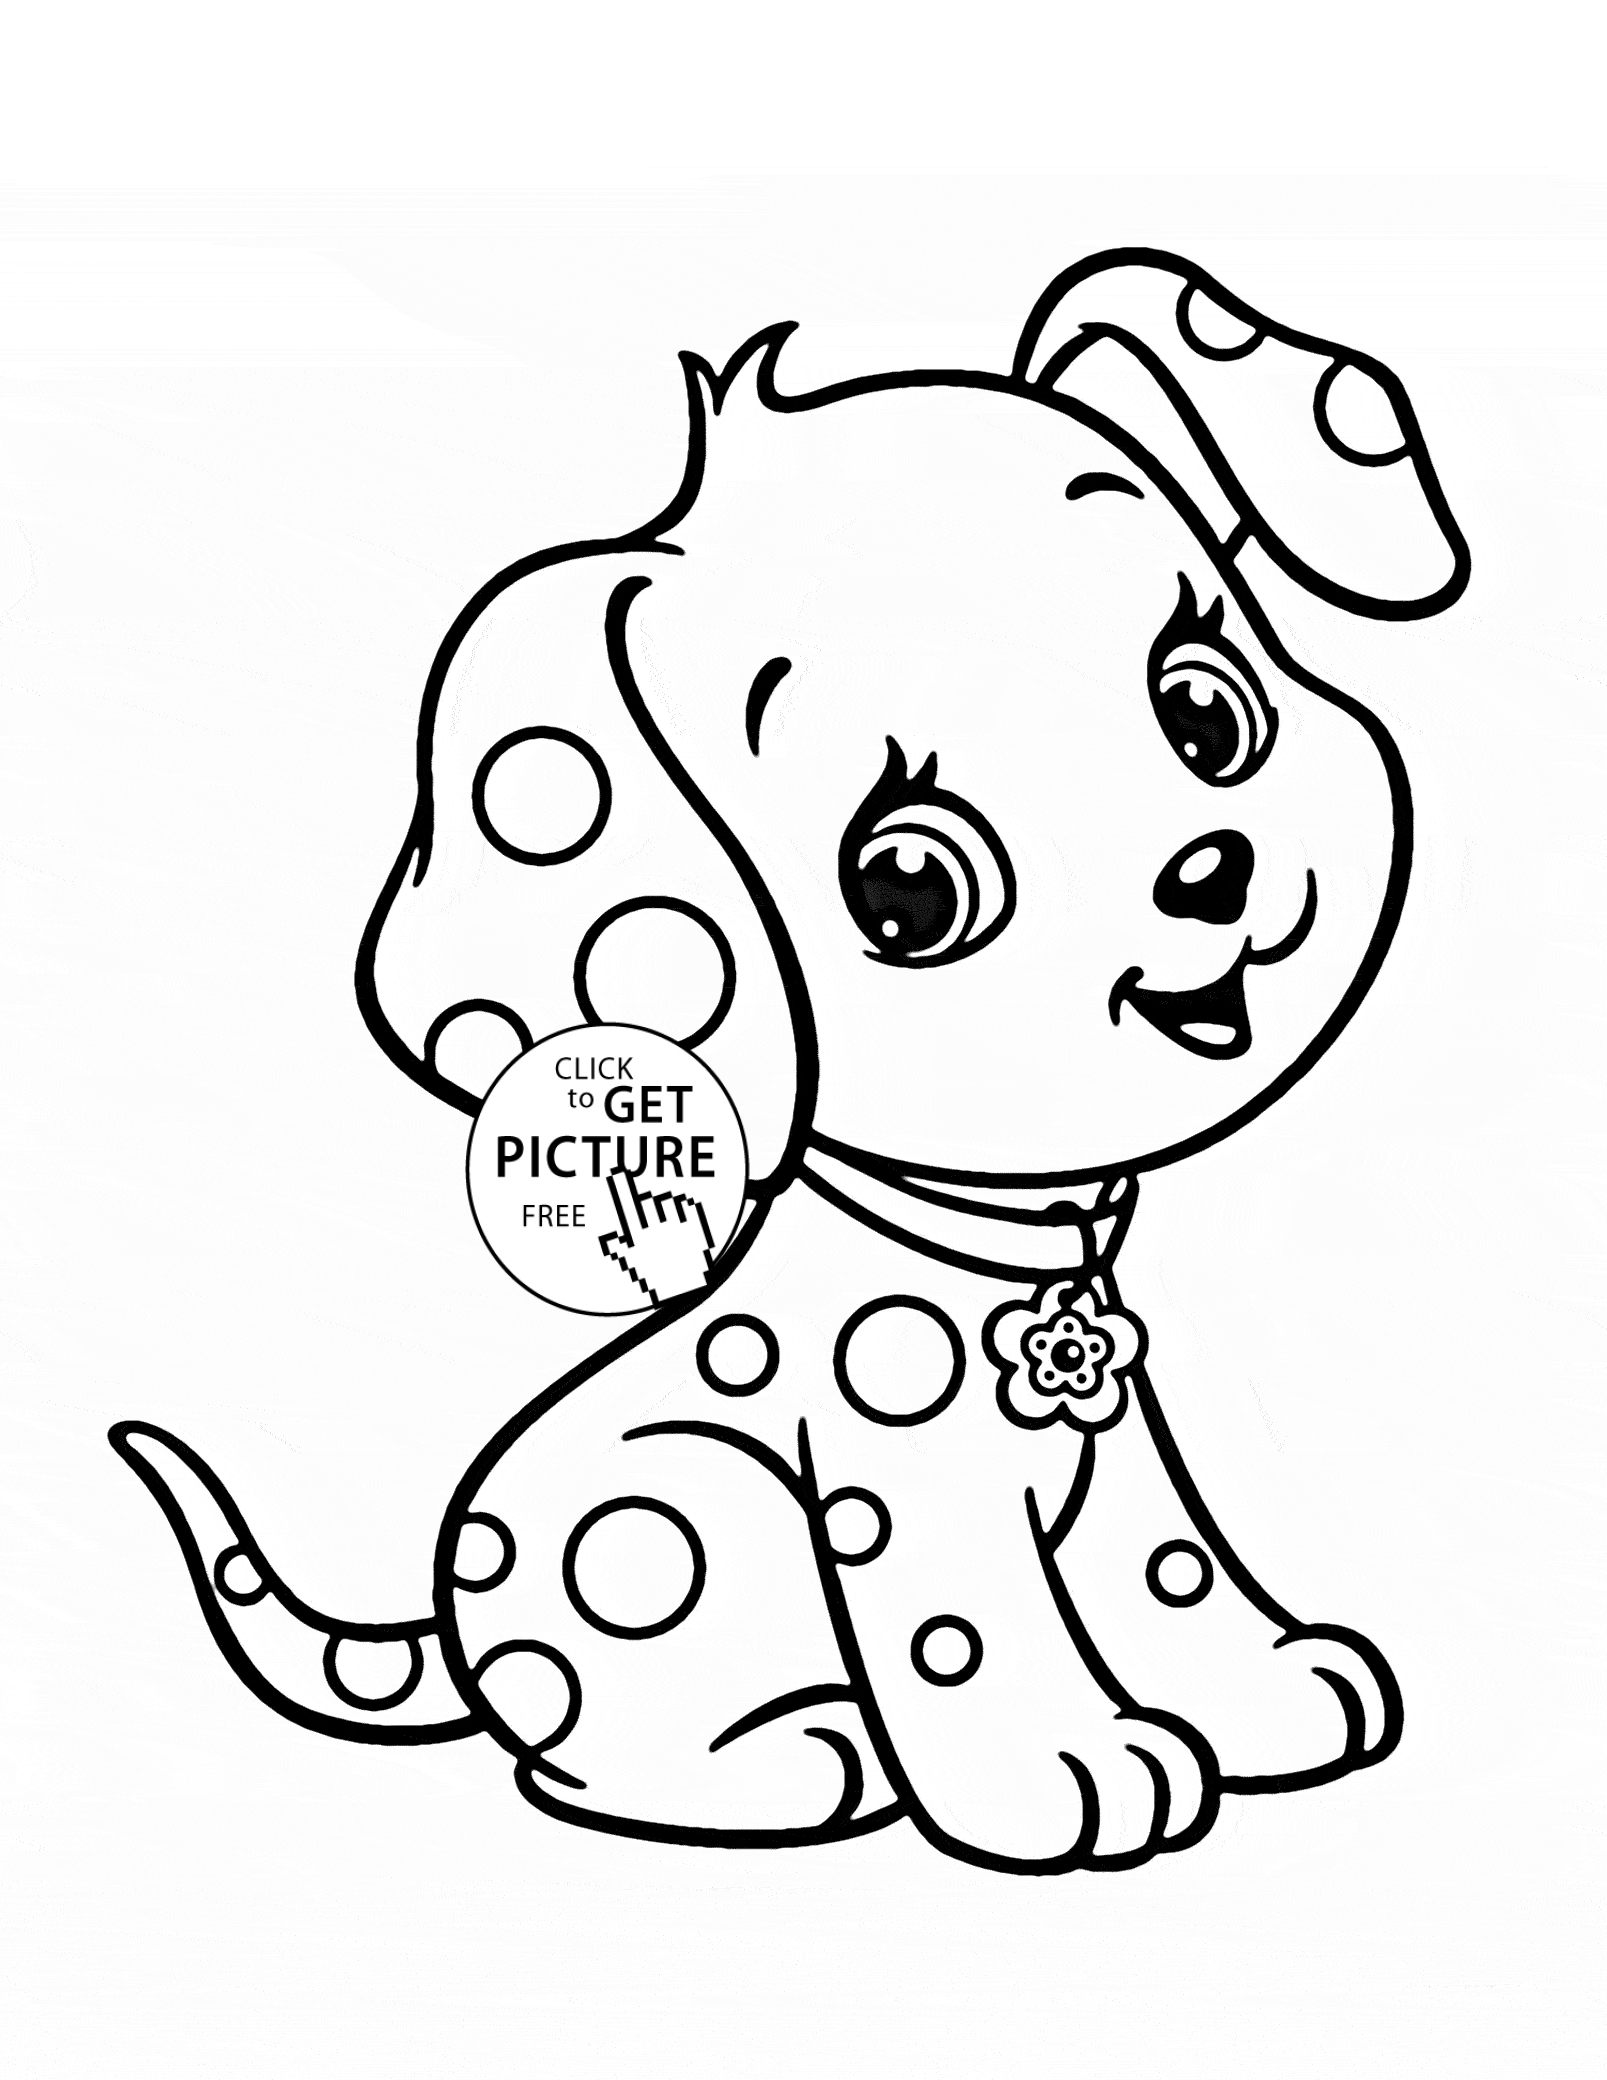 dog pictures to color free puppy cute puppy coloring pages dog color free to pictures 